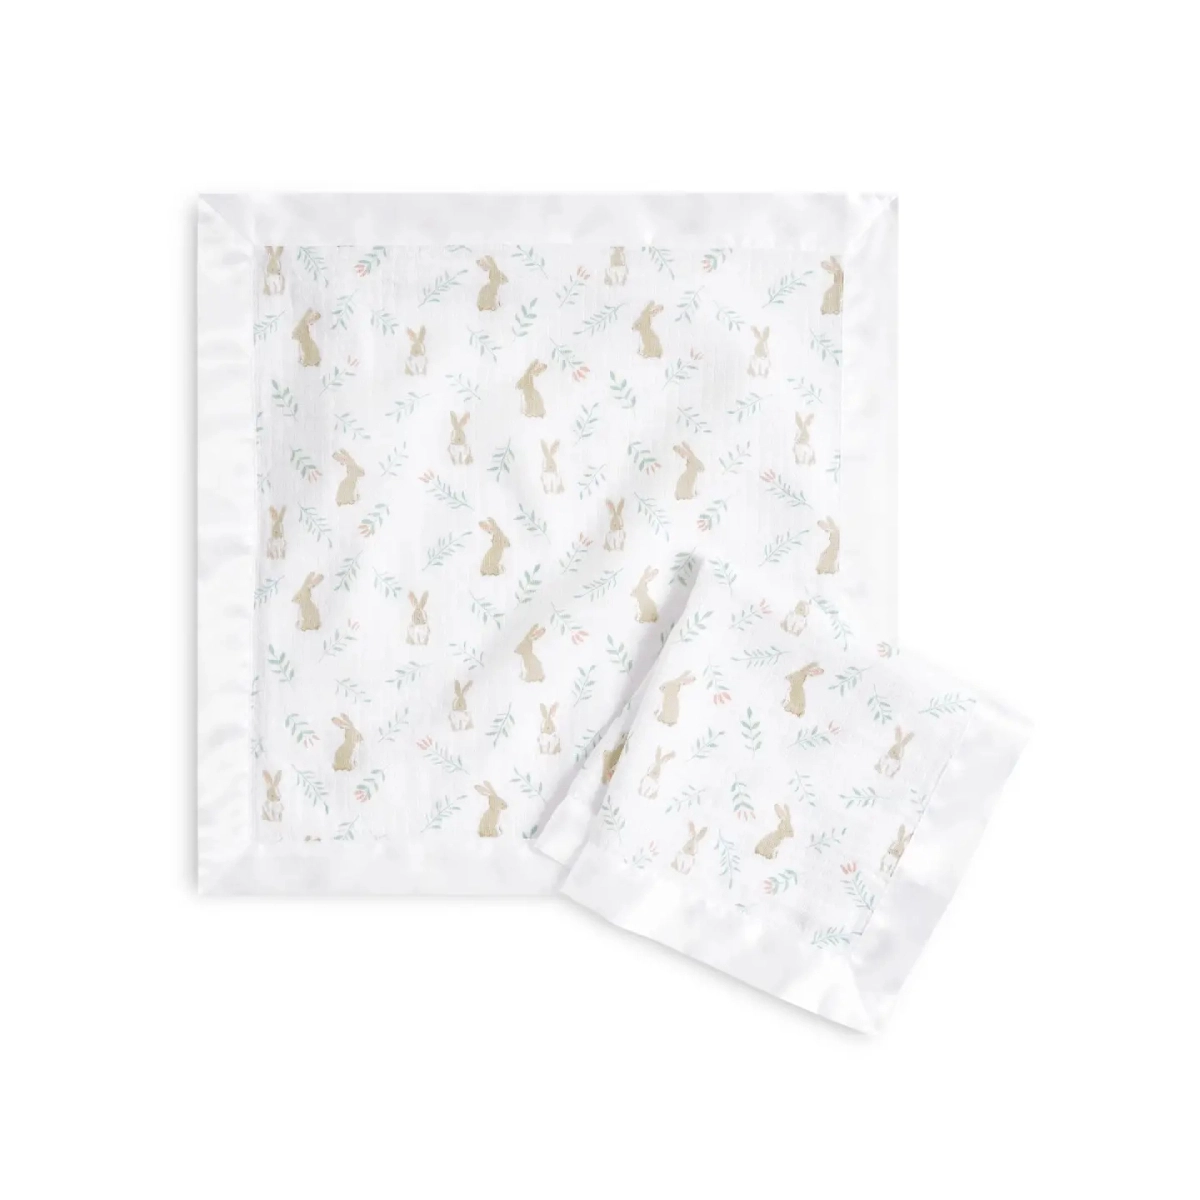 Image of Aden + Anais Pack of 2 Essential Cotton Muslin Security Blankets - Blushing Bunnies (23-19-383)